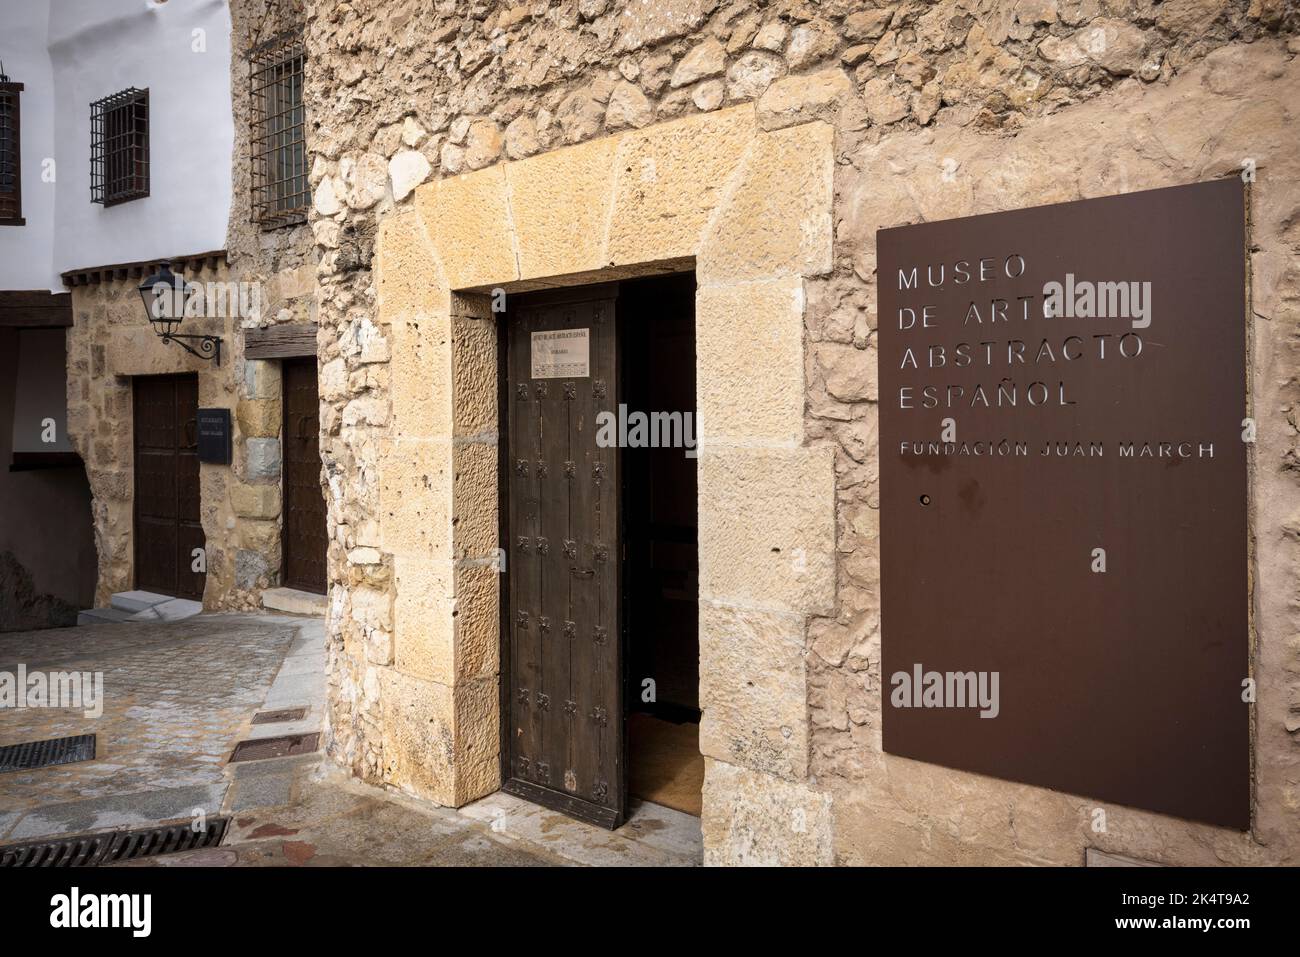 Cuenca, Cuenca Province, Castile-La Mancha, Spain.  Entrance to the Museum of Spanish Abstract Art -  Museo de Arte Abstracto Espanol.  The museum is Stock Photo